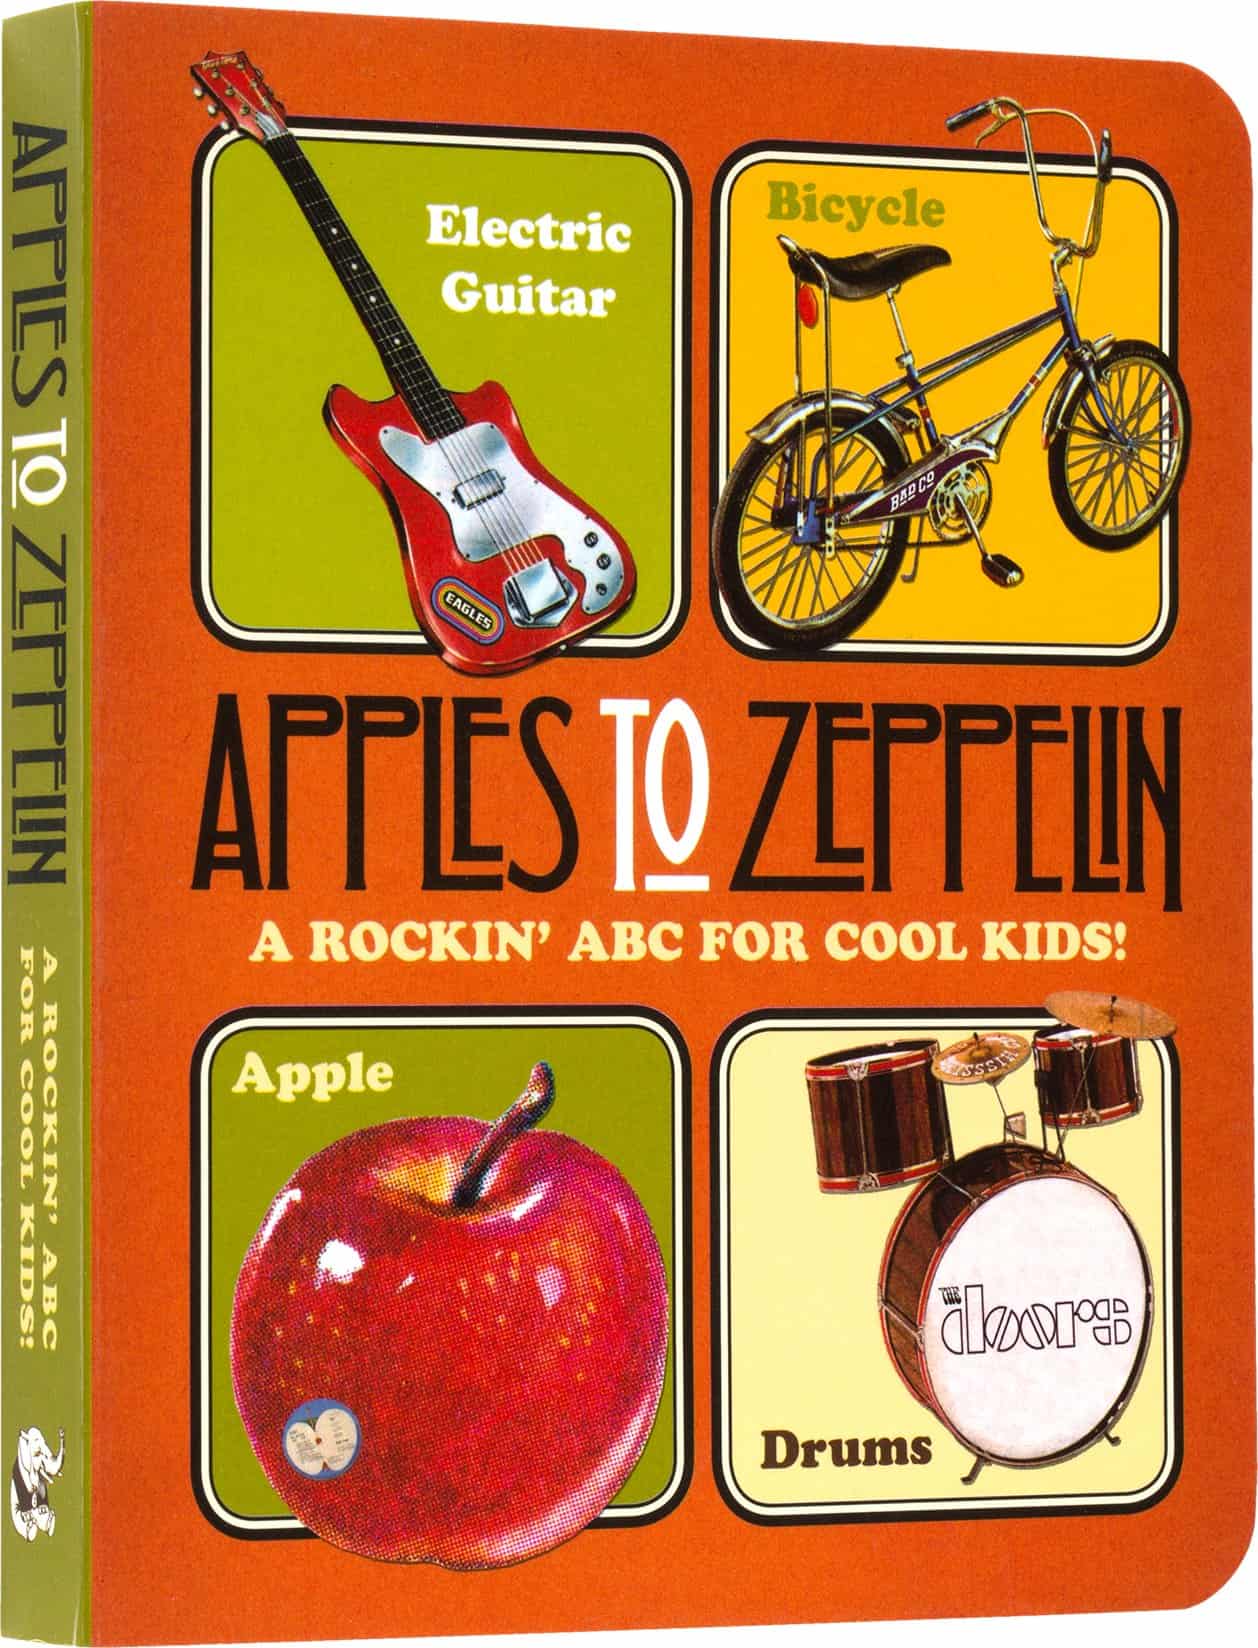 Apples to Zeppelin - A Rockin' ABC for Cool Kids!